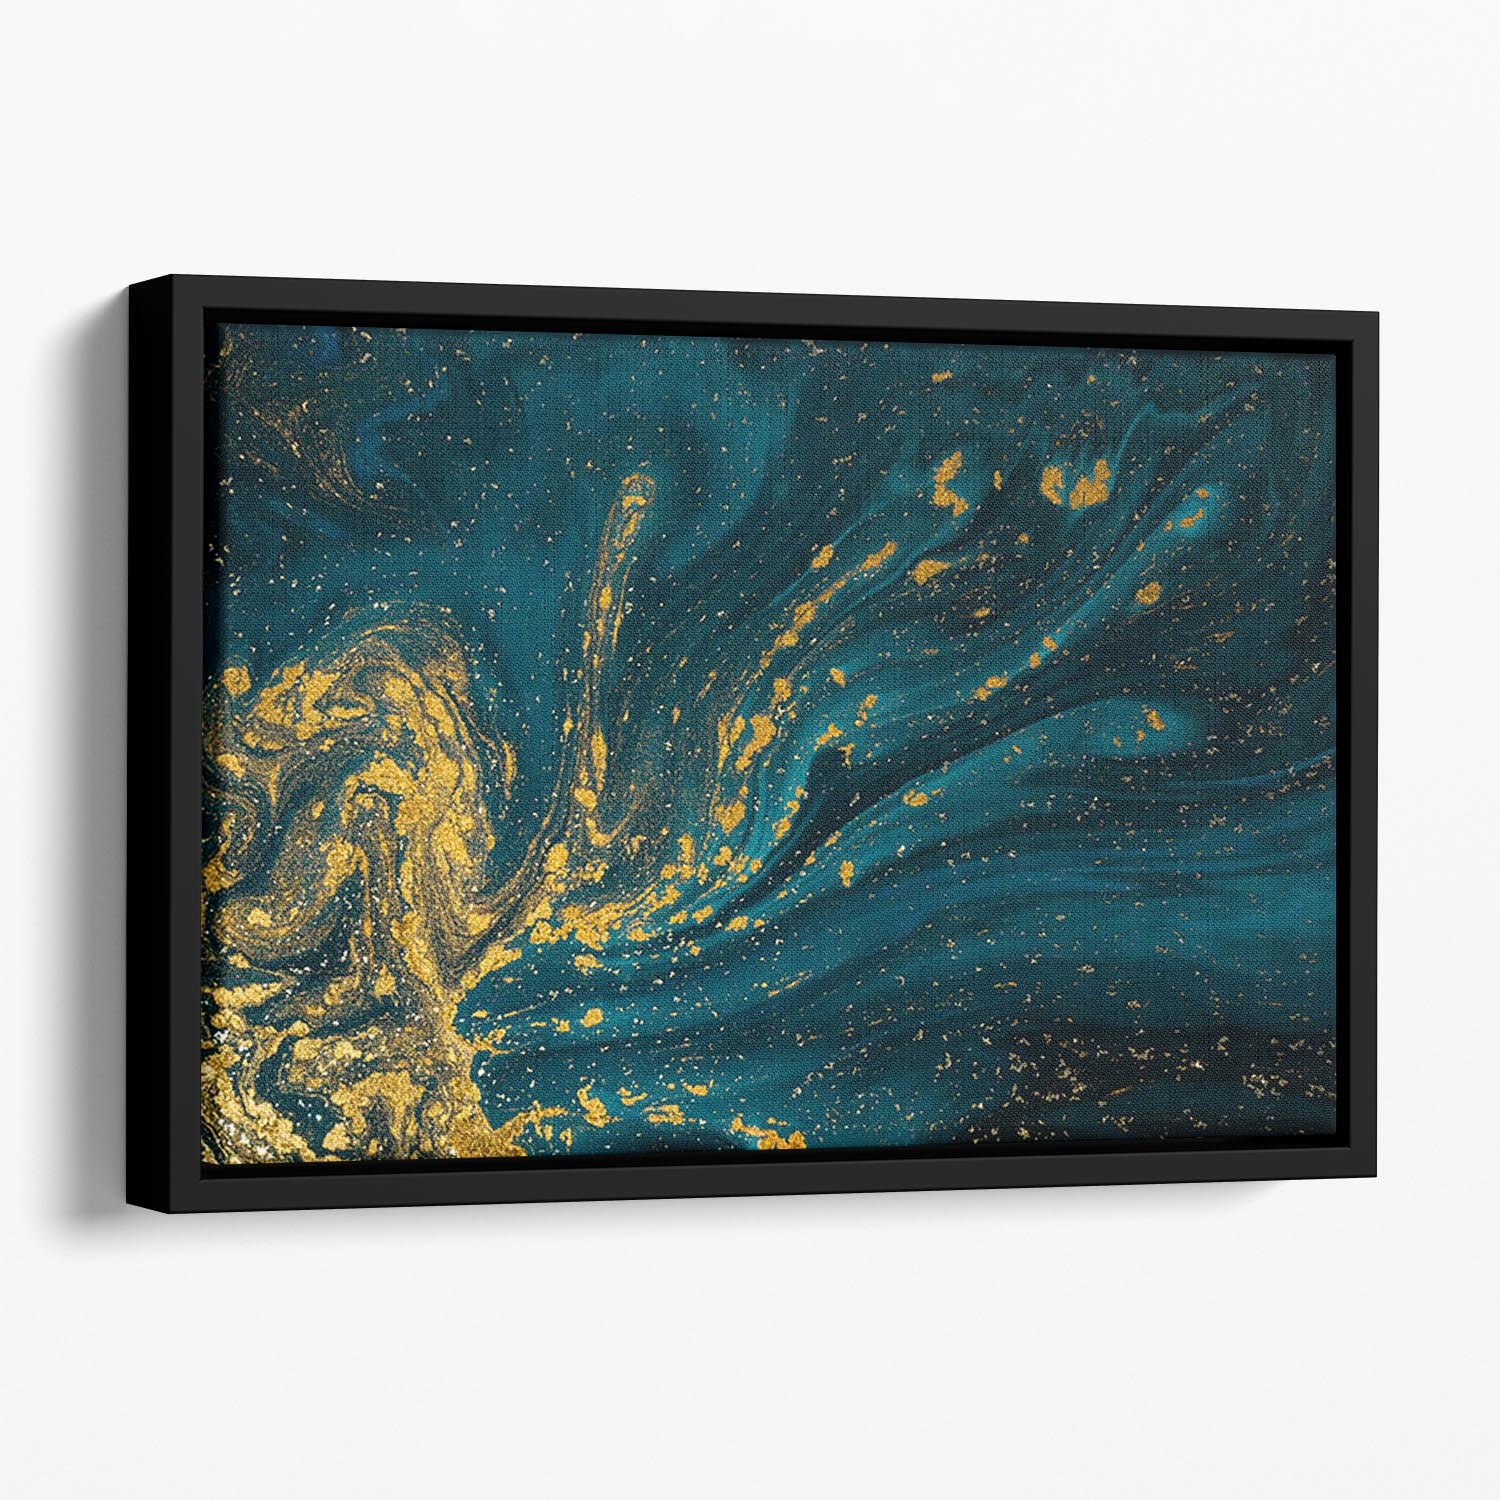 Emerald and Gold Swirled Marble Floating Framed Canvas - Canvas Art Rocks - 1